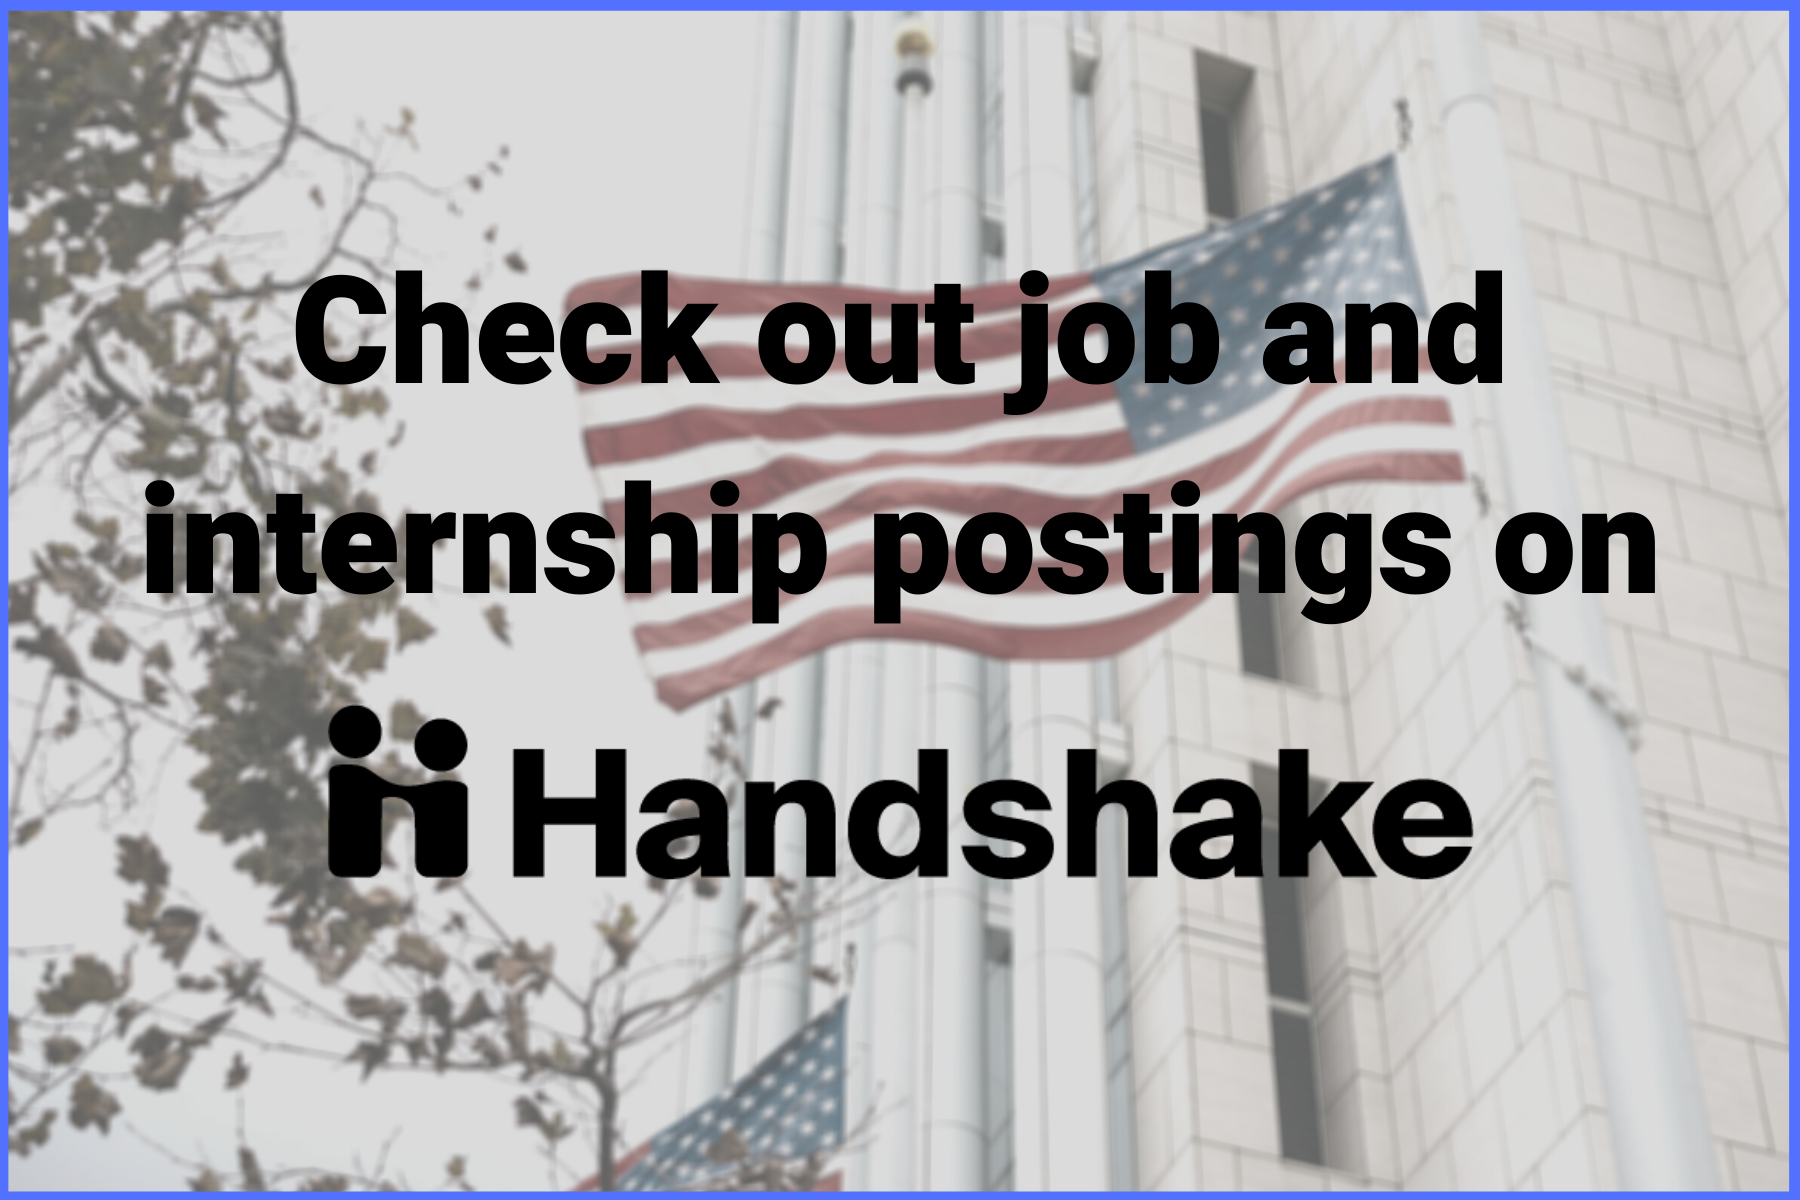 Find opportunities in government, law and politics on Handshake